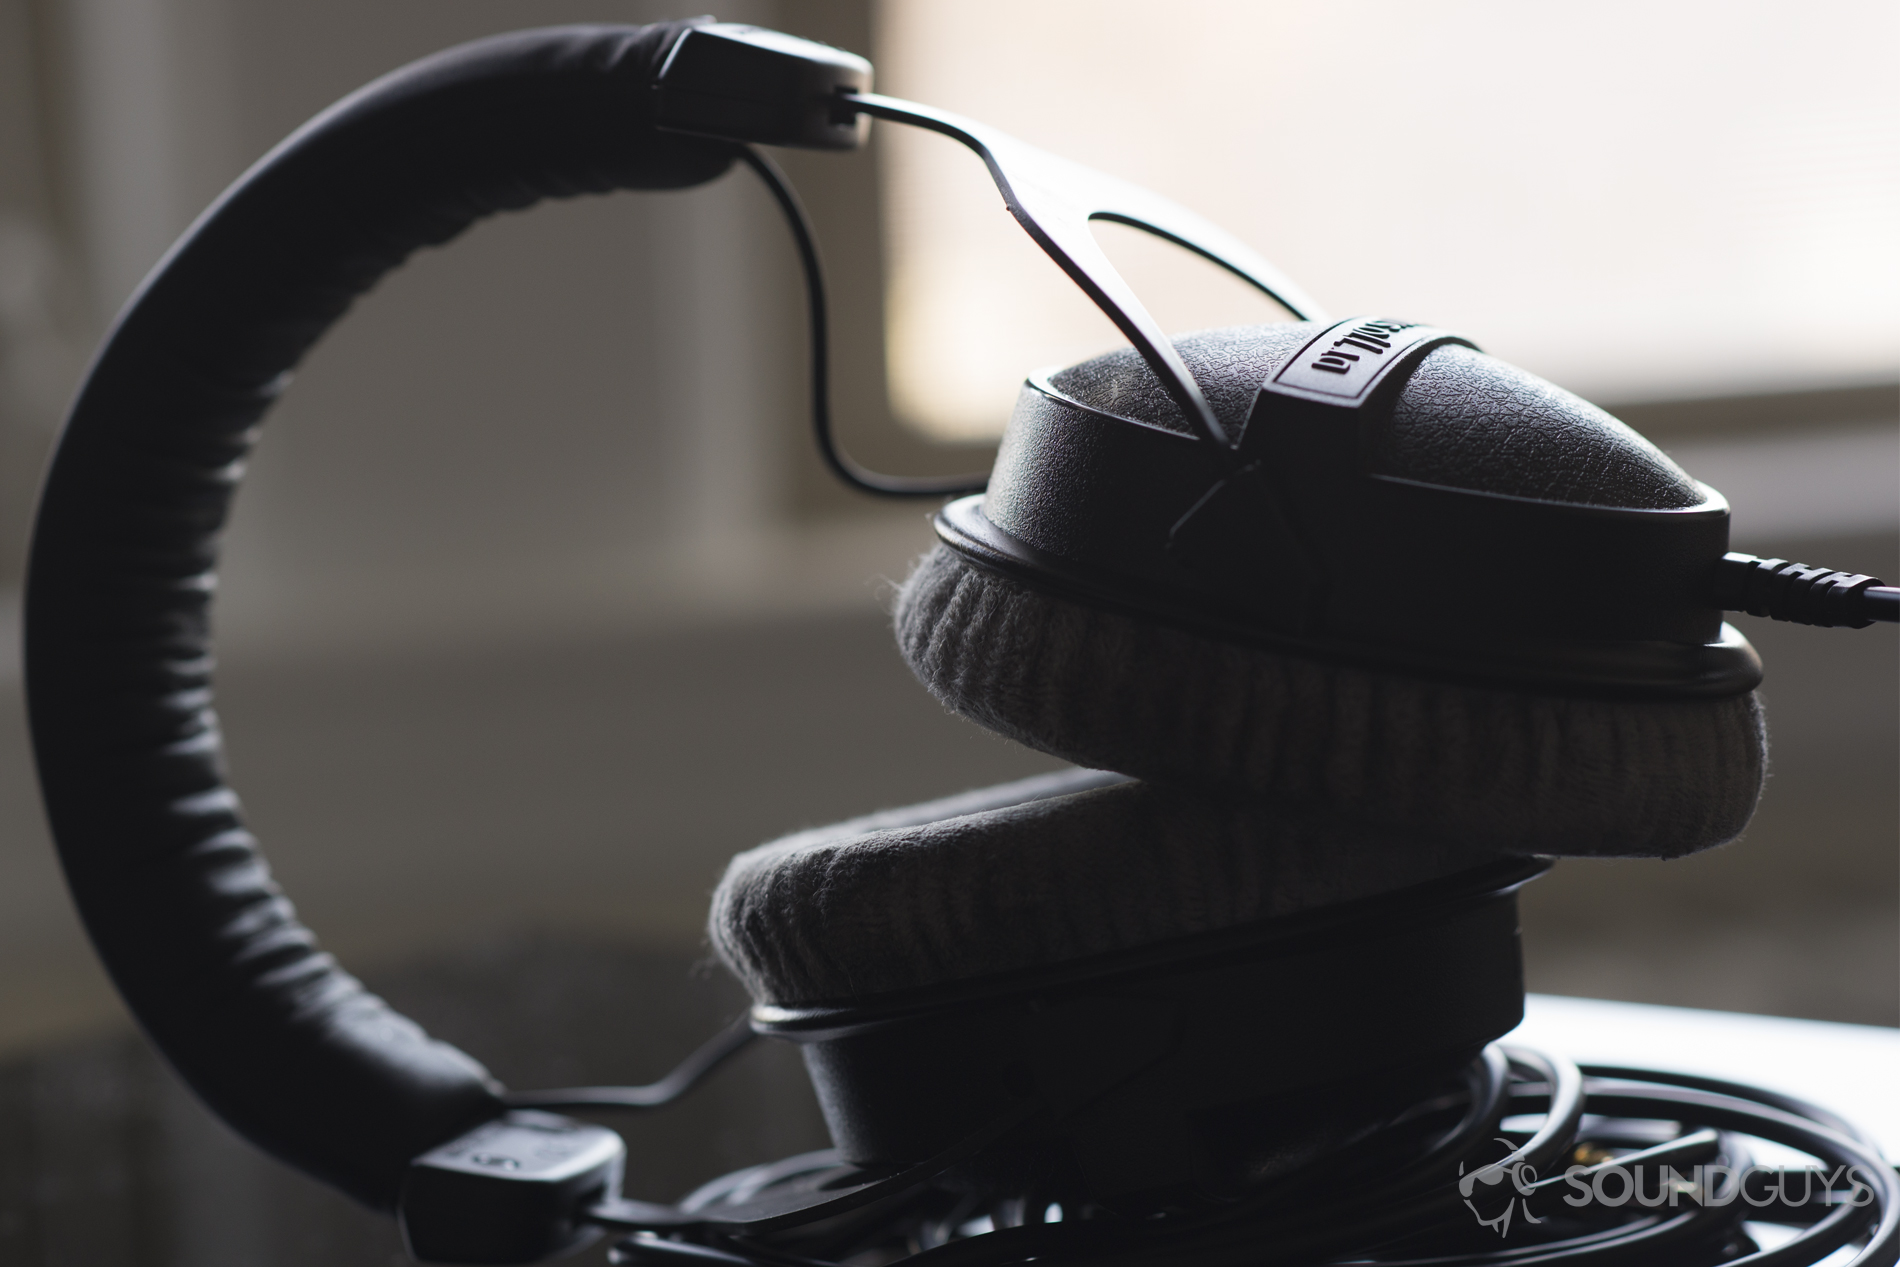 Beyerdynamic DT 770 Studio review: Audiophile sound without the pricetag -  CNET